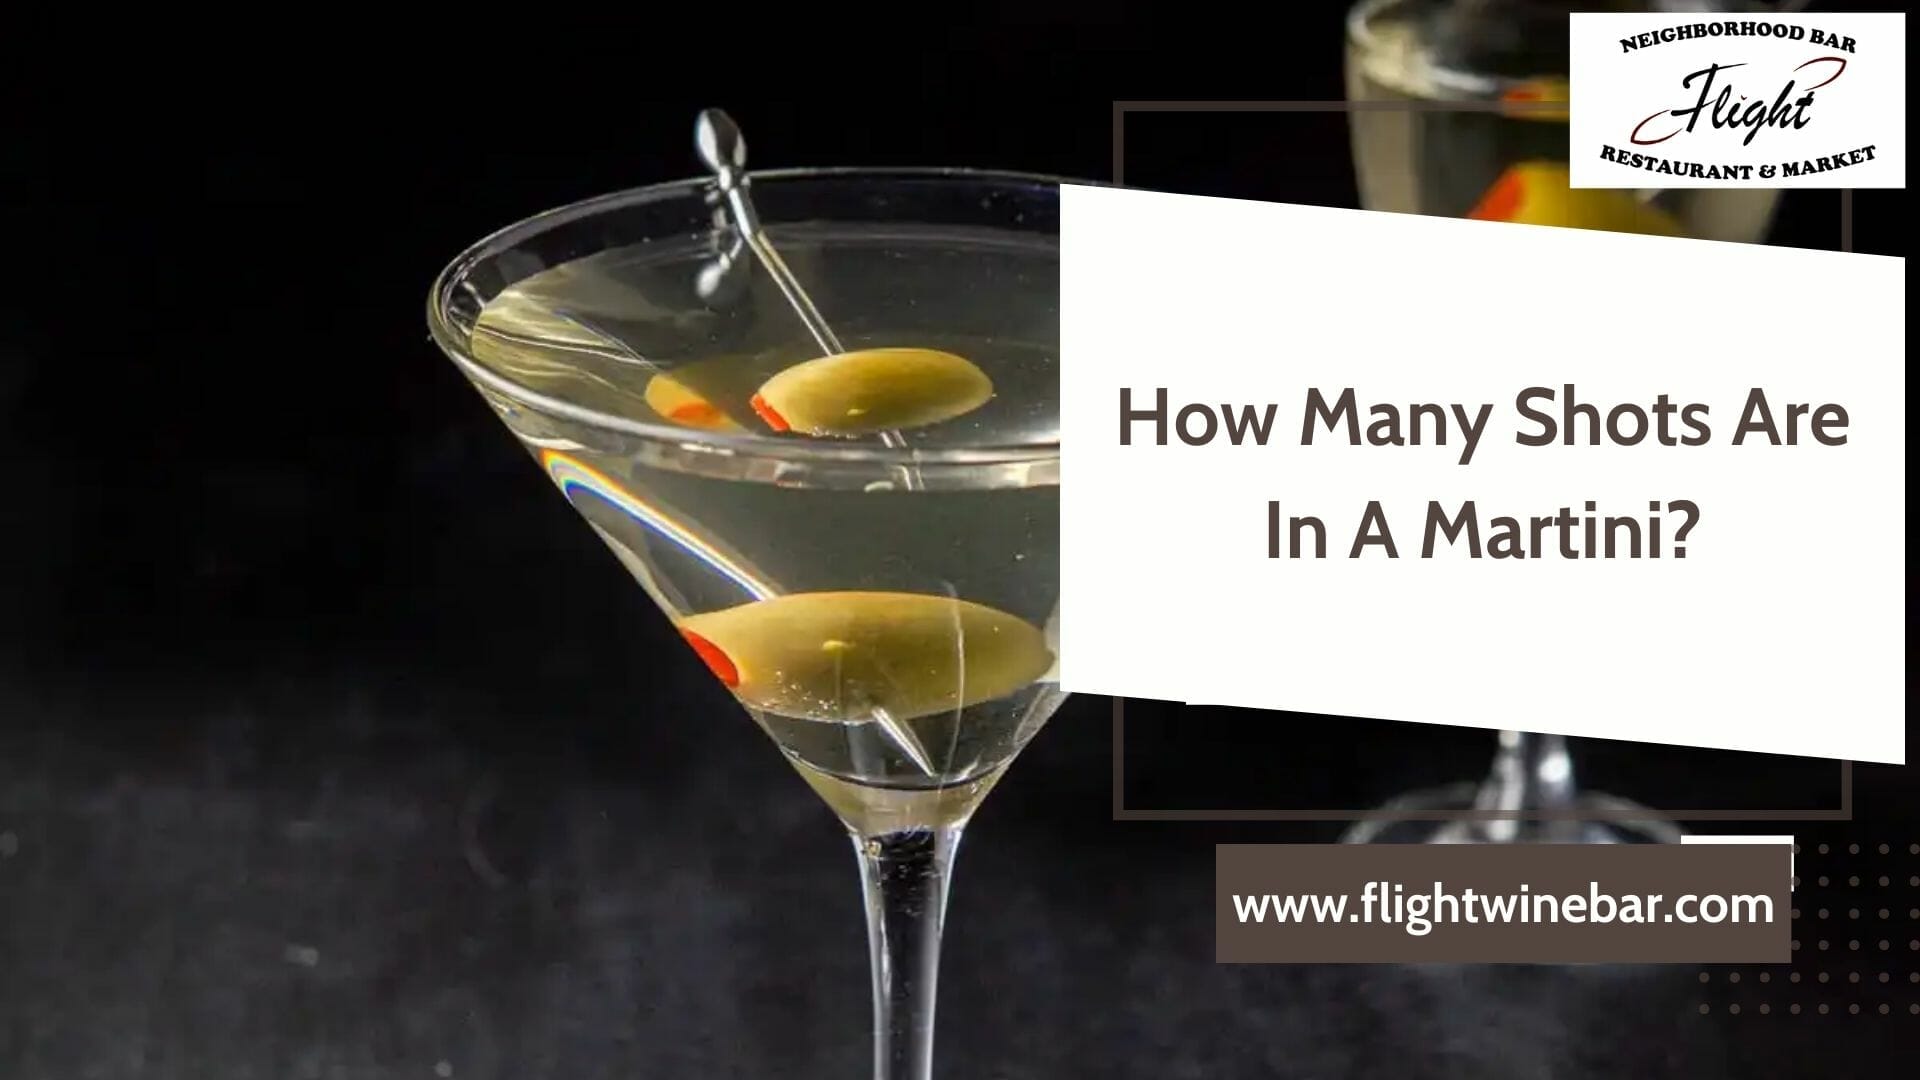 How Many Shots Are In A Martini